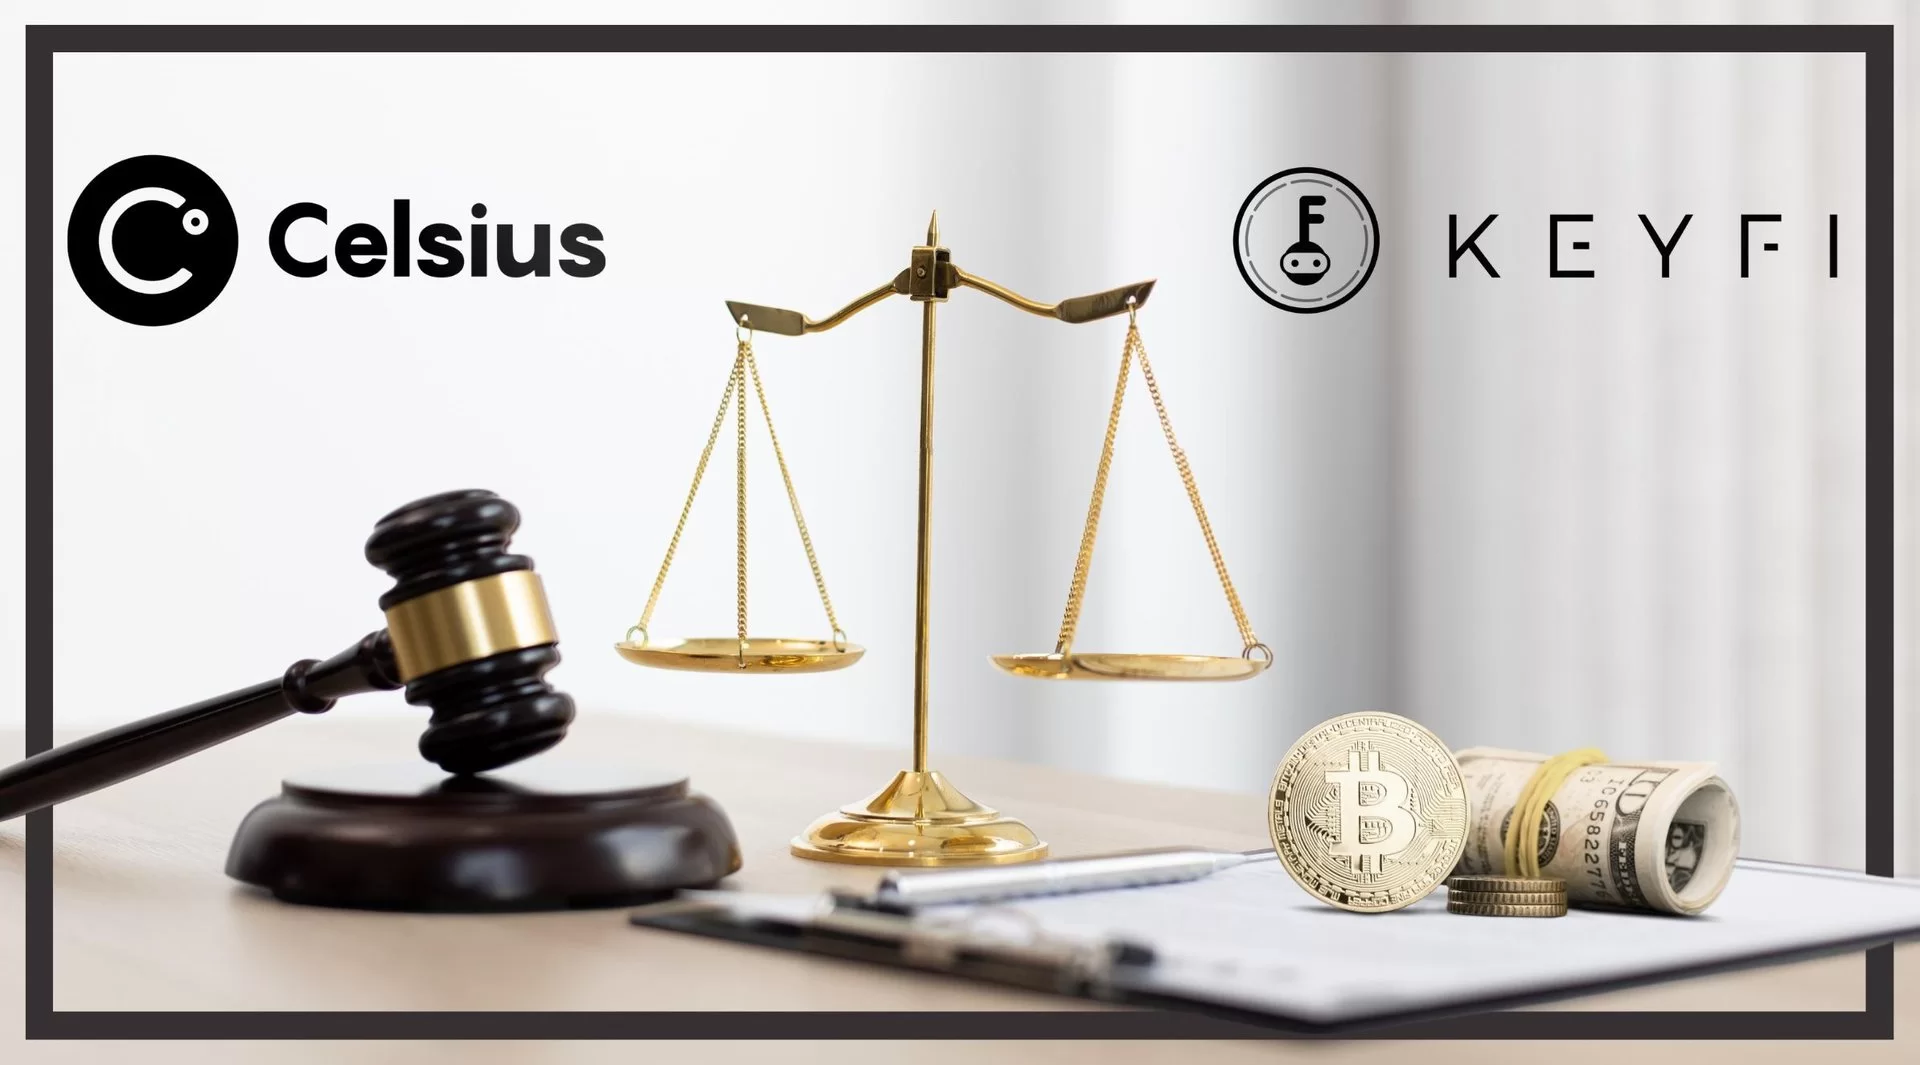 Celsius and KeyFi Settle 3 Years Fraud Dispute, Hope to Begin A New Chapter Begins